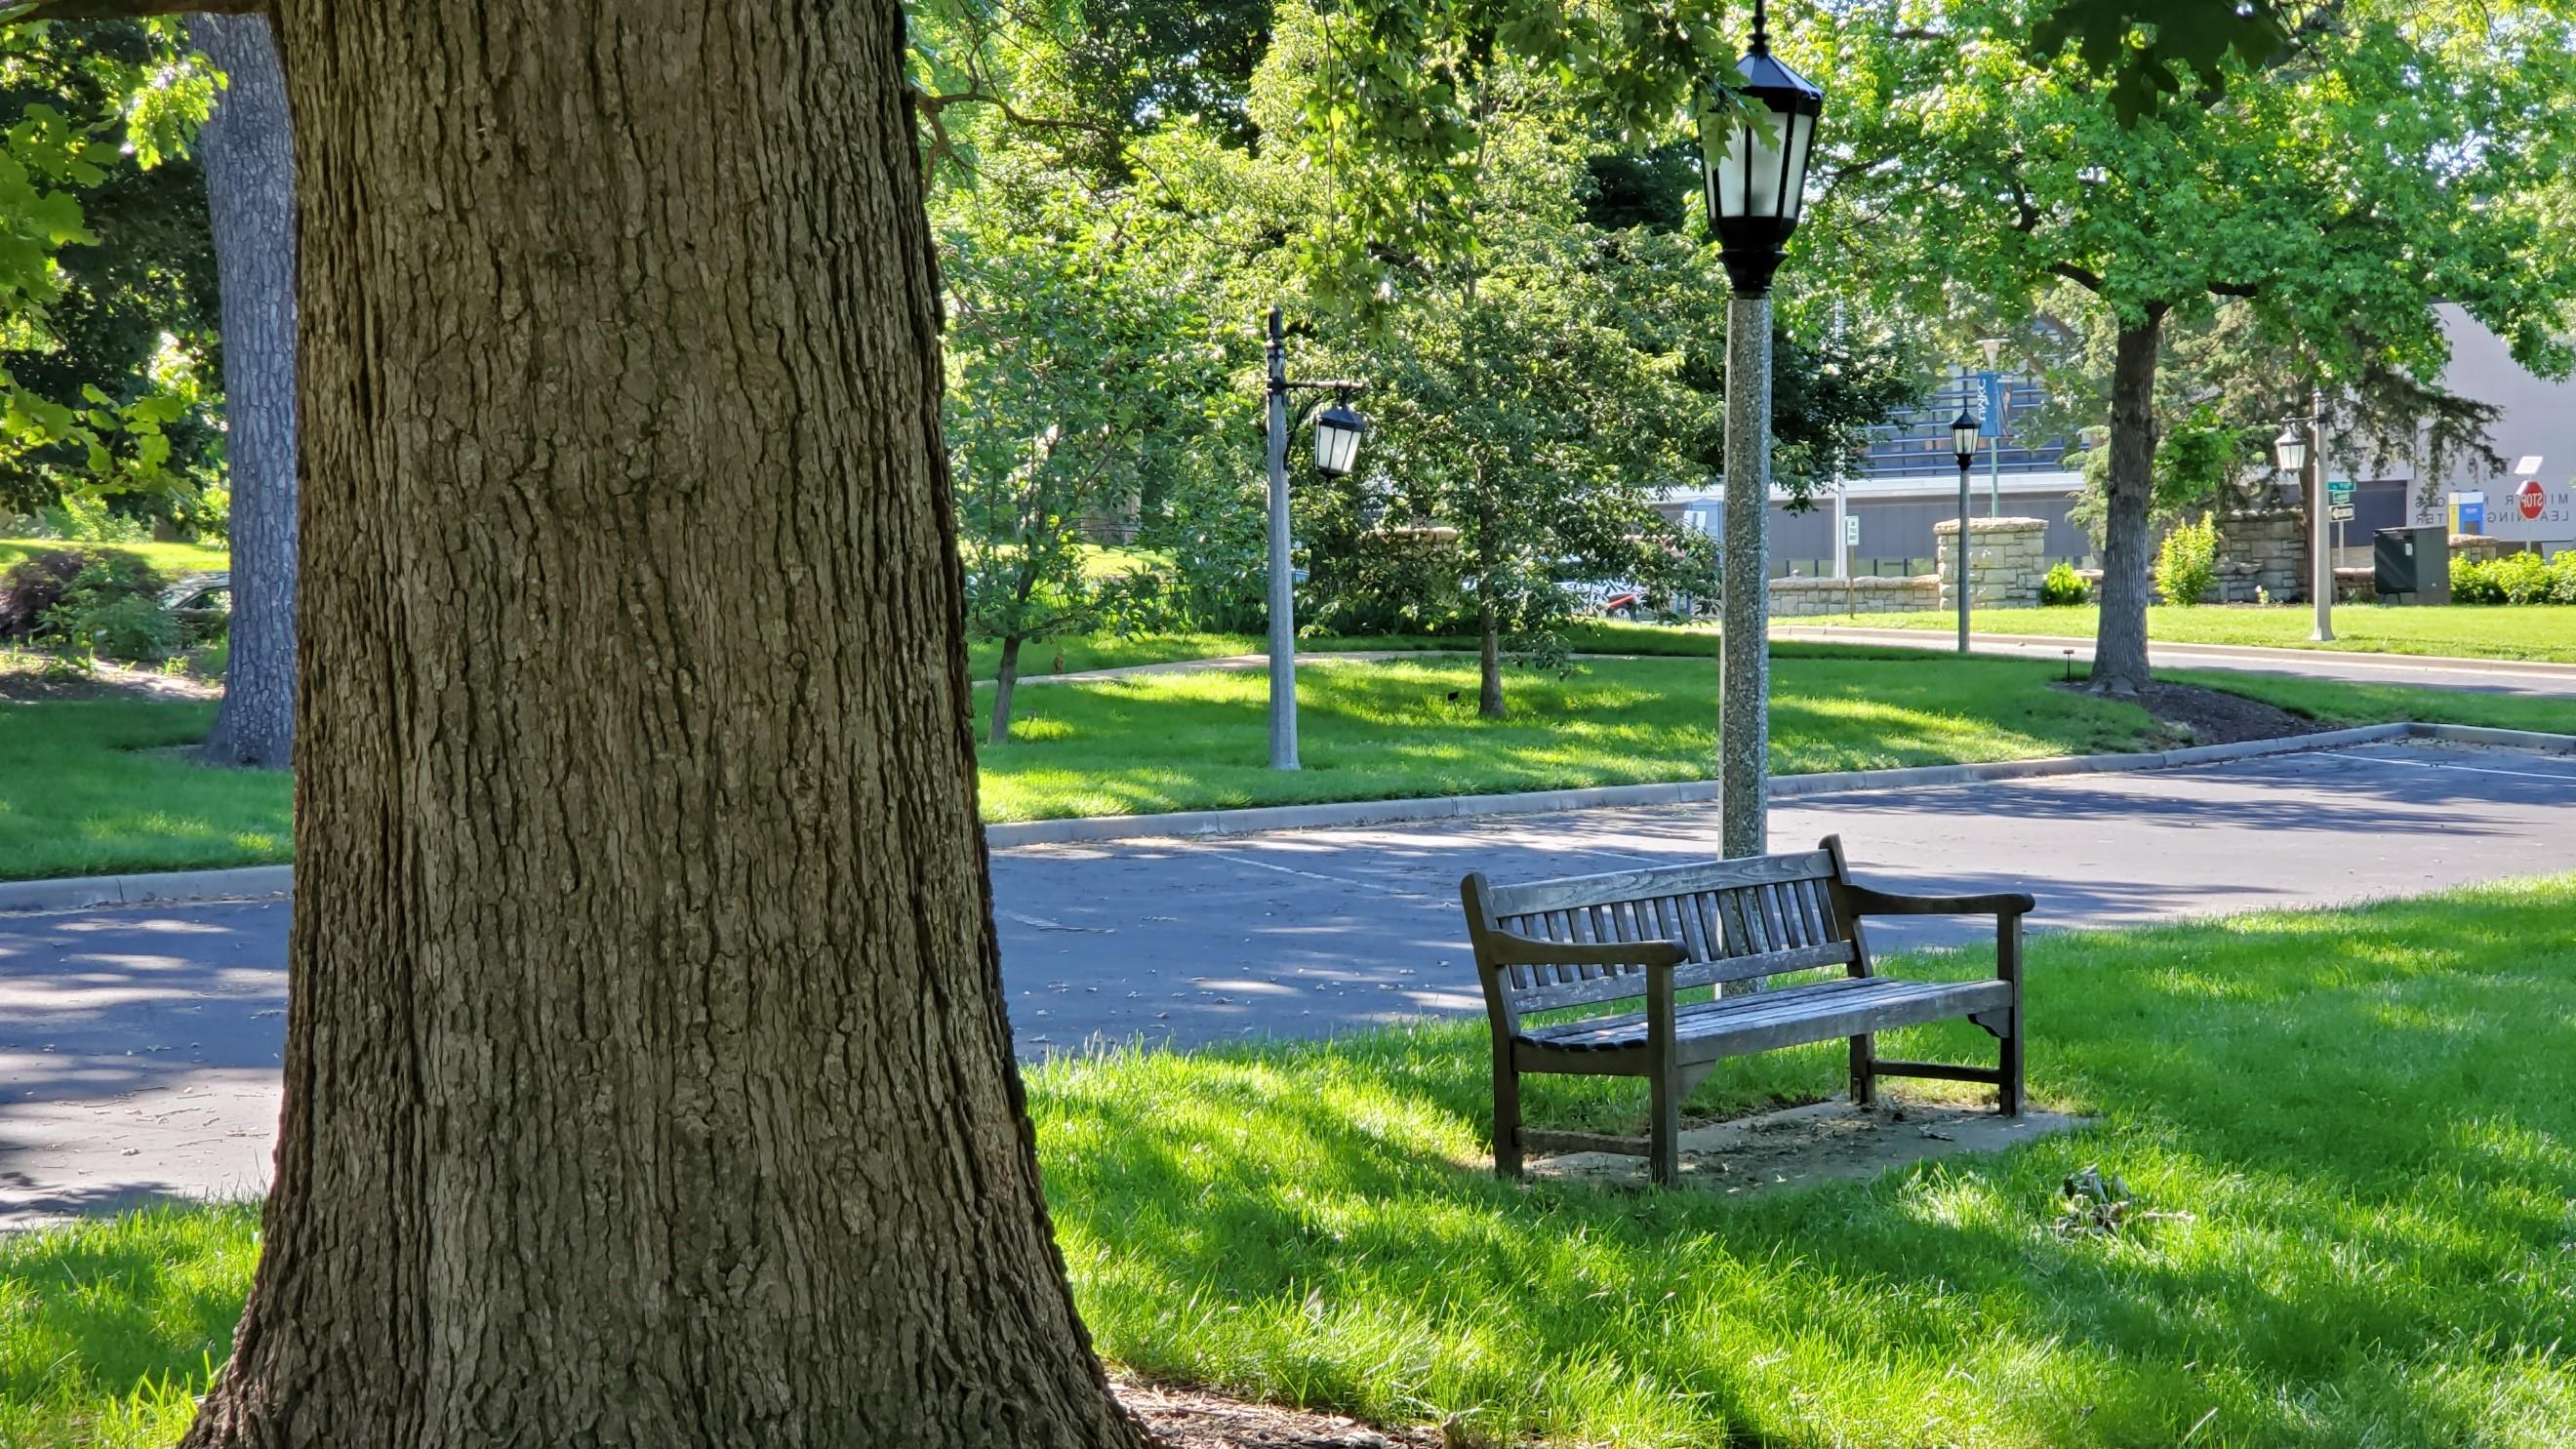 Bench and greenery on campus